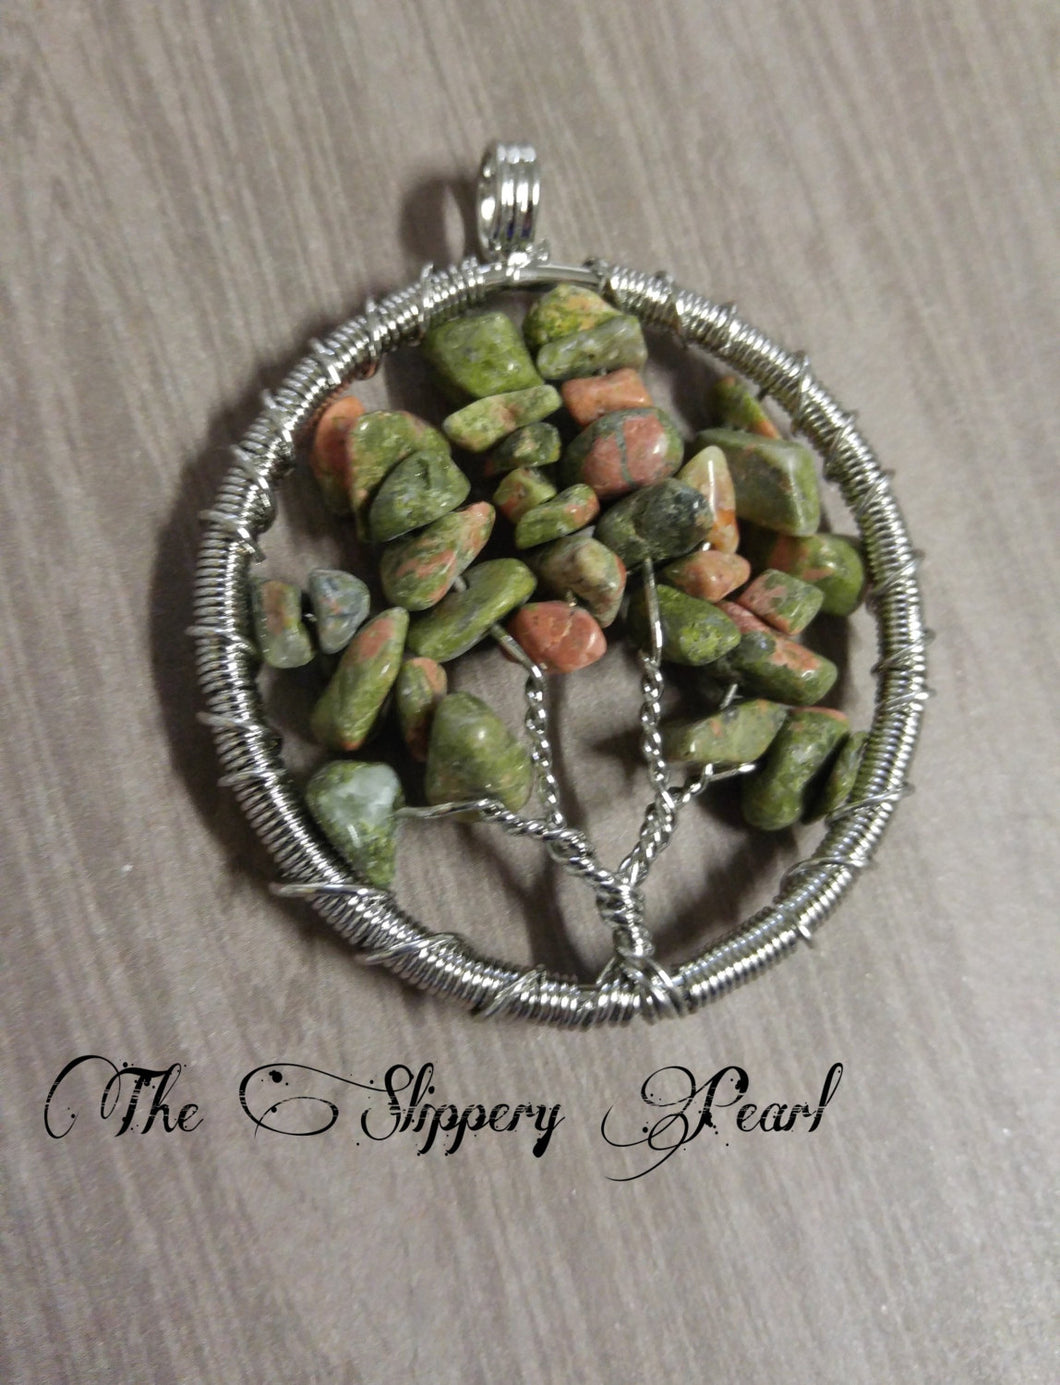 Wire Wrapped Tree of Life Pendant With Unakite Gemstones Silver 48mm Green Gemstones